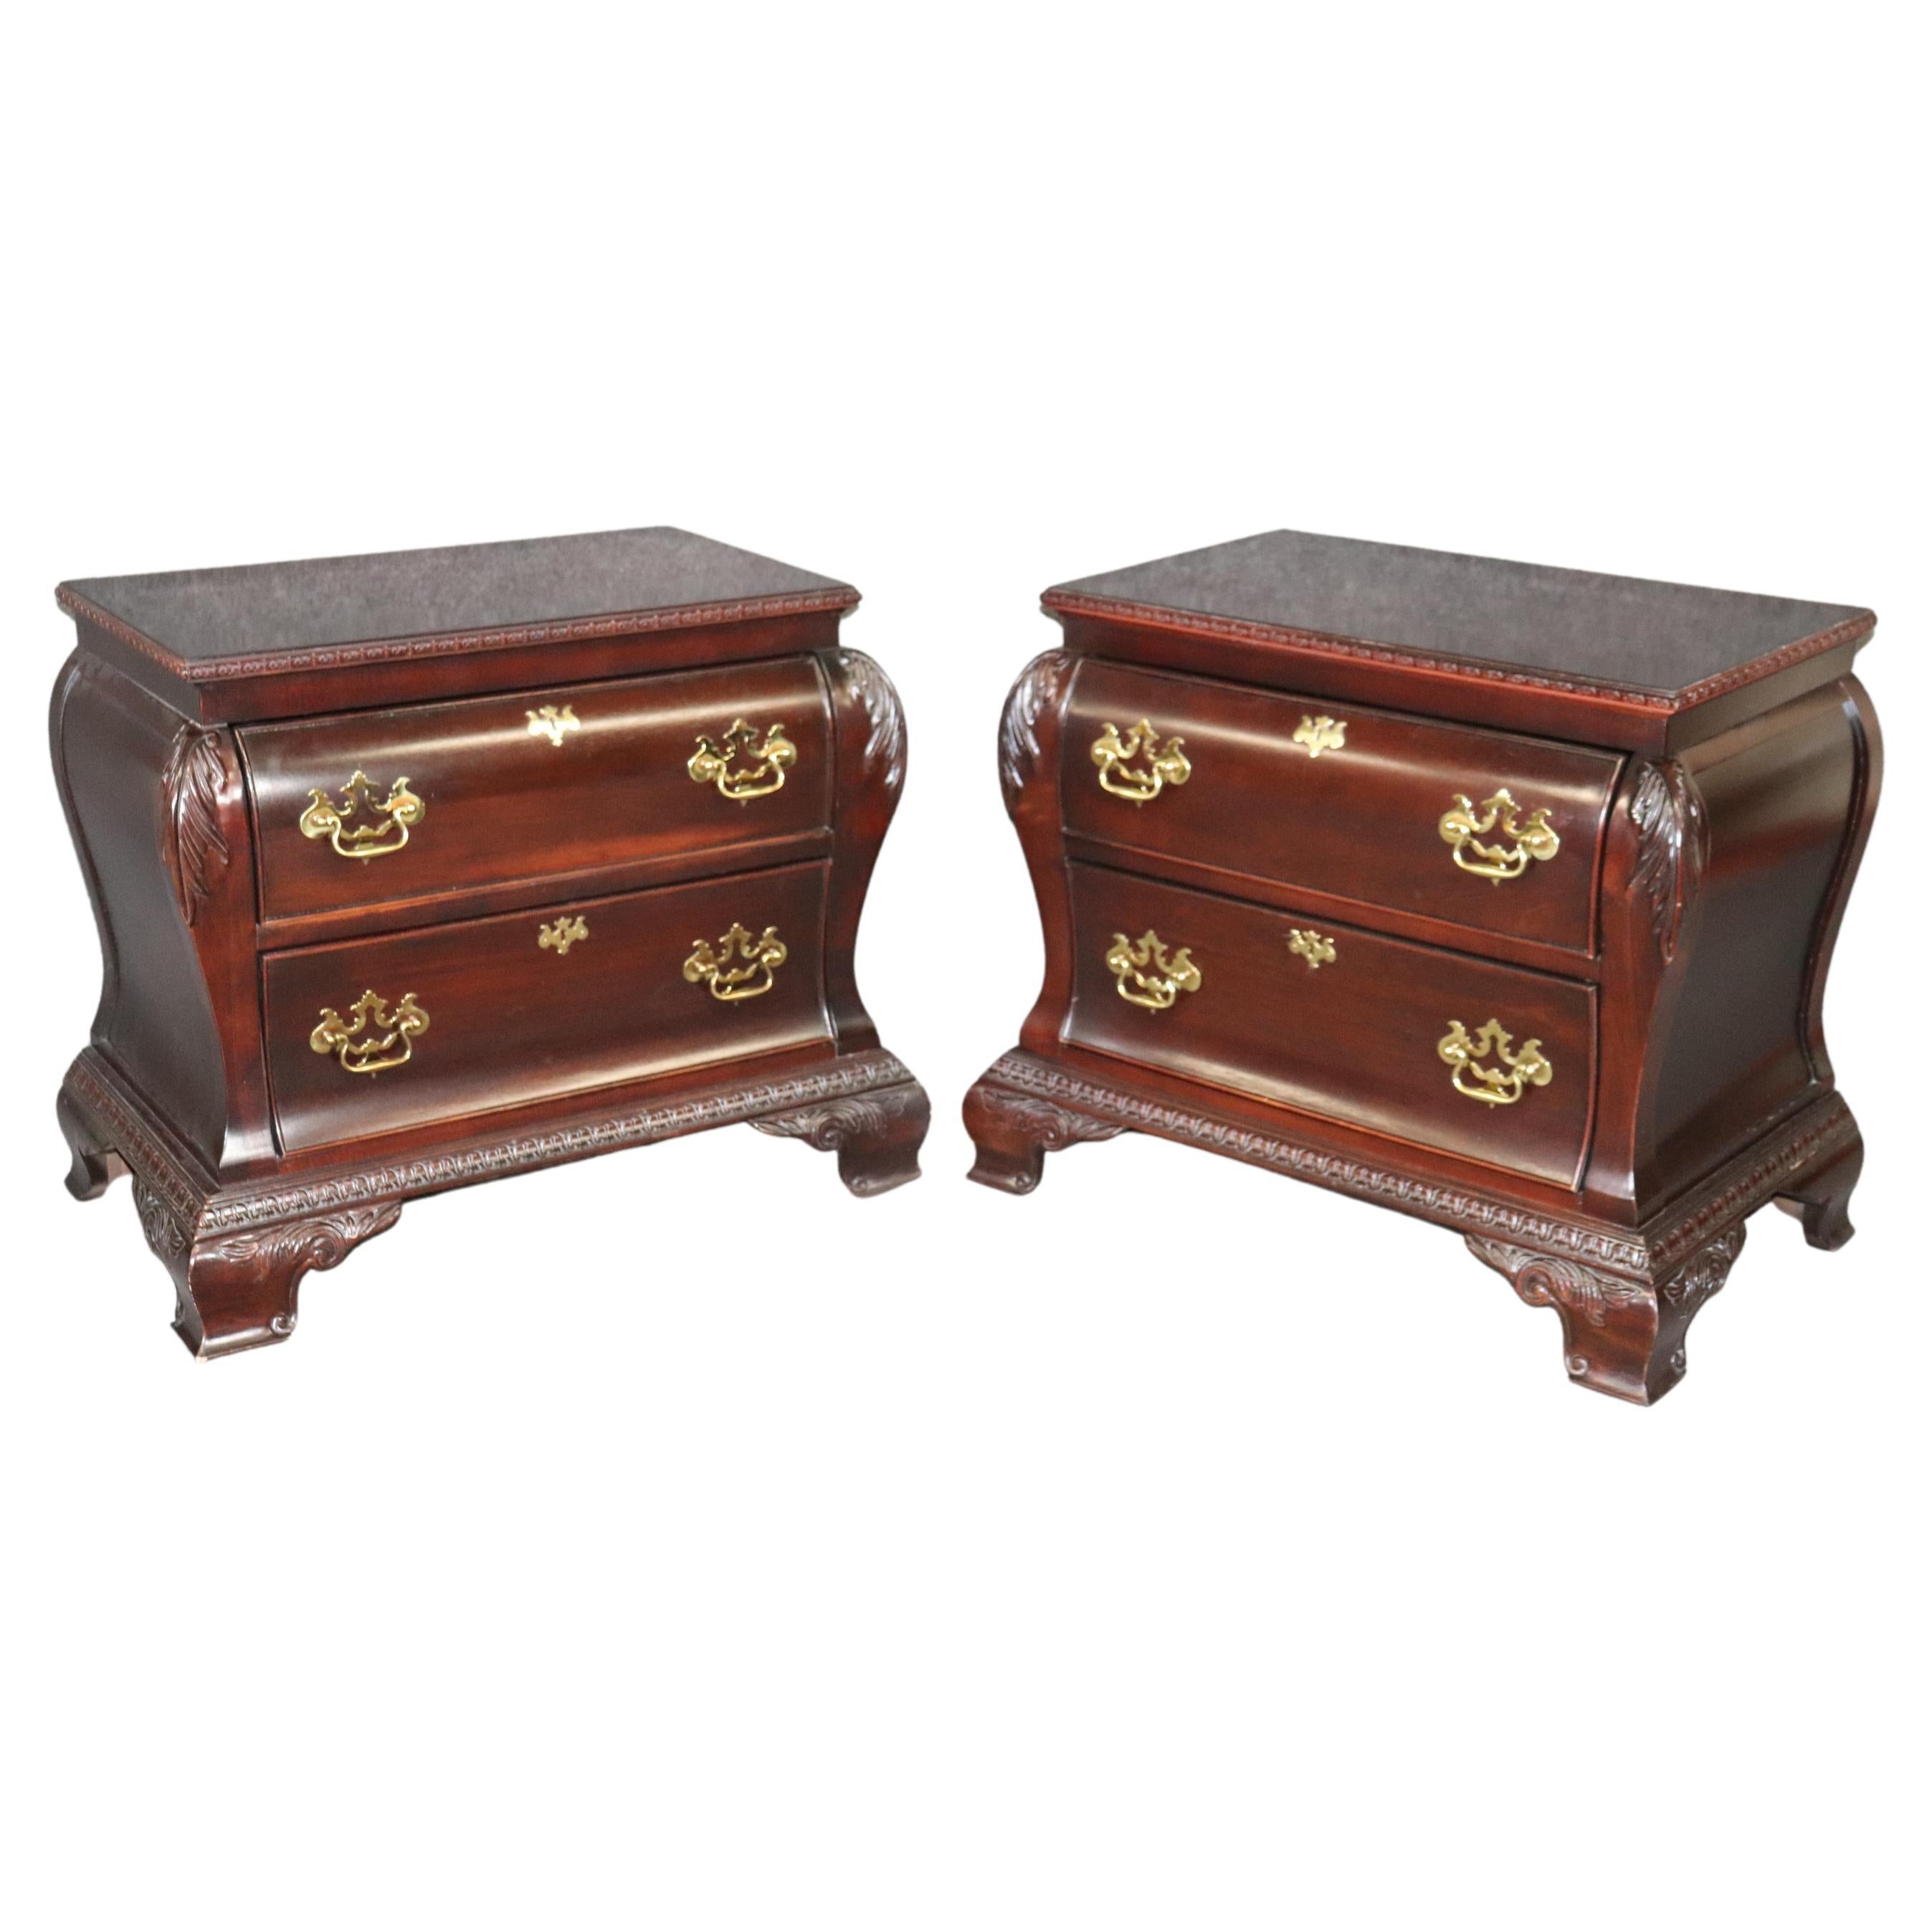 Pair of Banded Mahogany Chippendale Bombe Rococo Style Century Nightstands